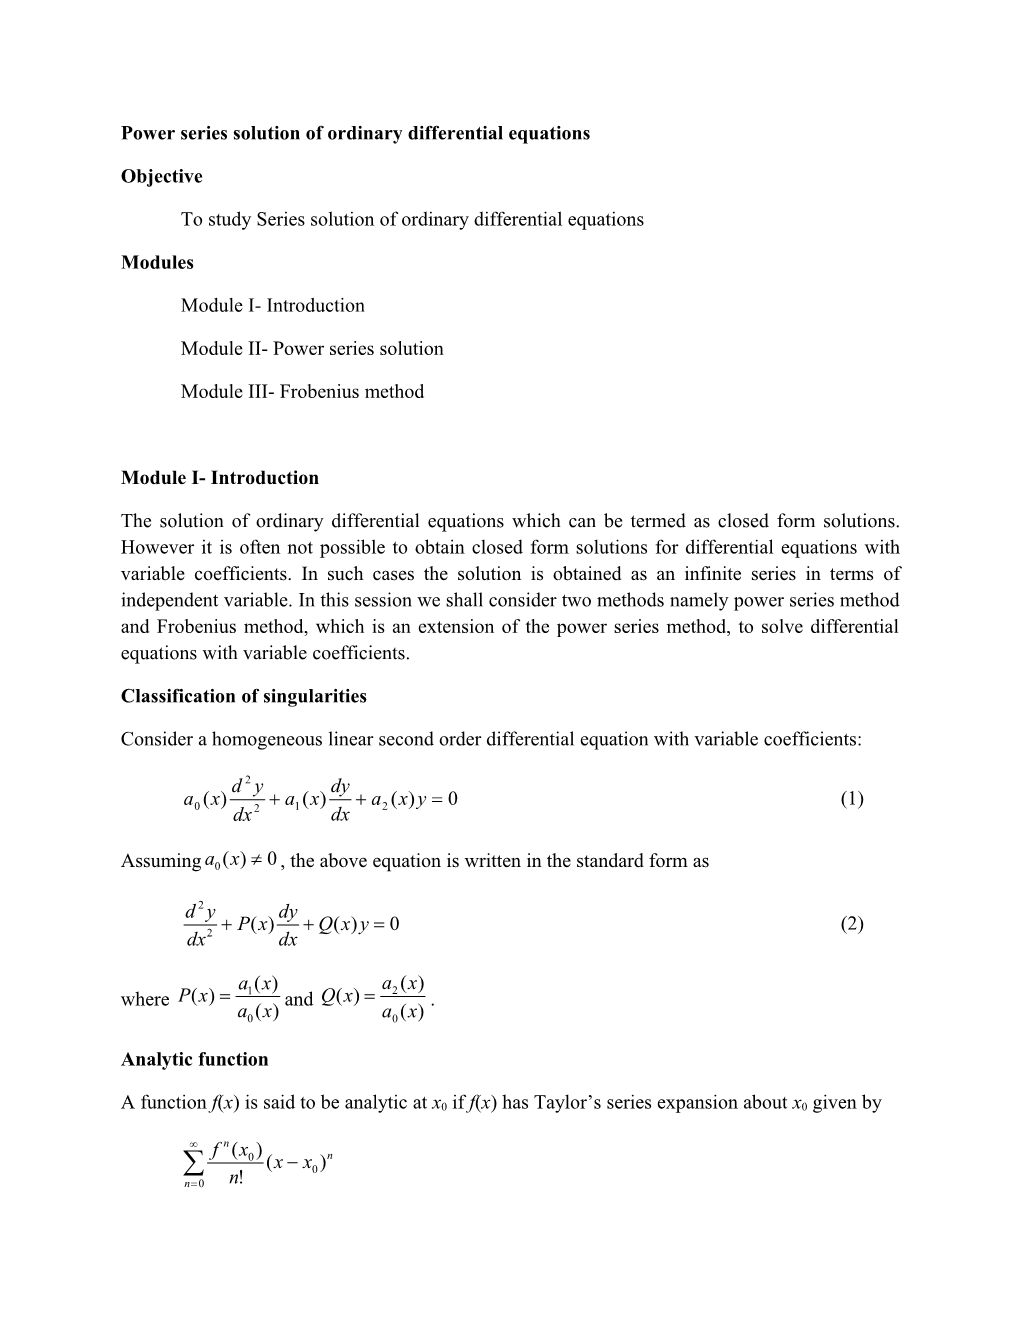 Power Series Solution of Ordinary Differential Equations